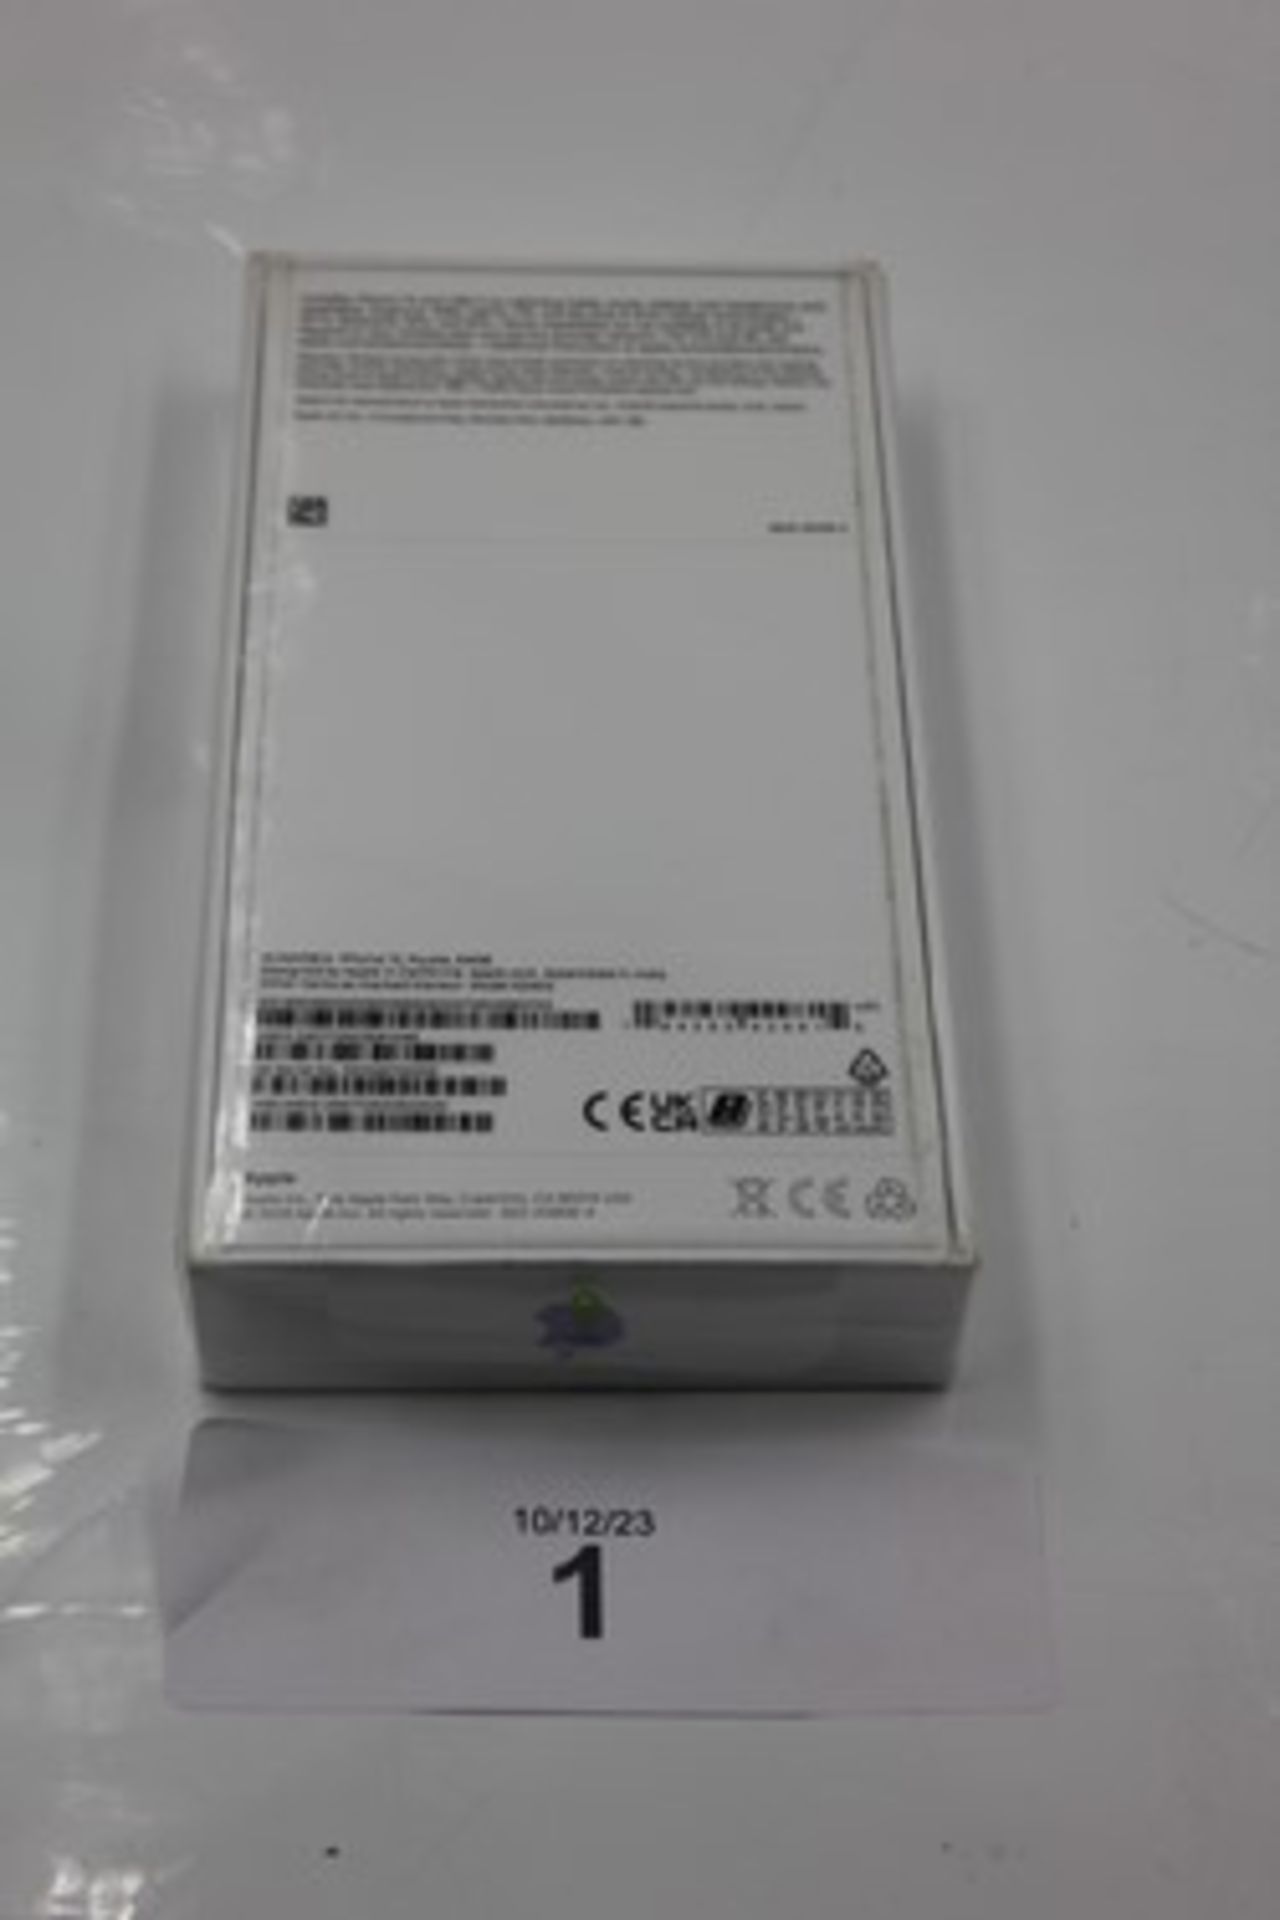 1 x Apple iPhone 12, purple, 64GB, model No: A2403, IMEI No: 355772533522020 - sealed new in box (